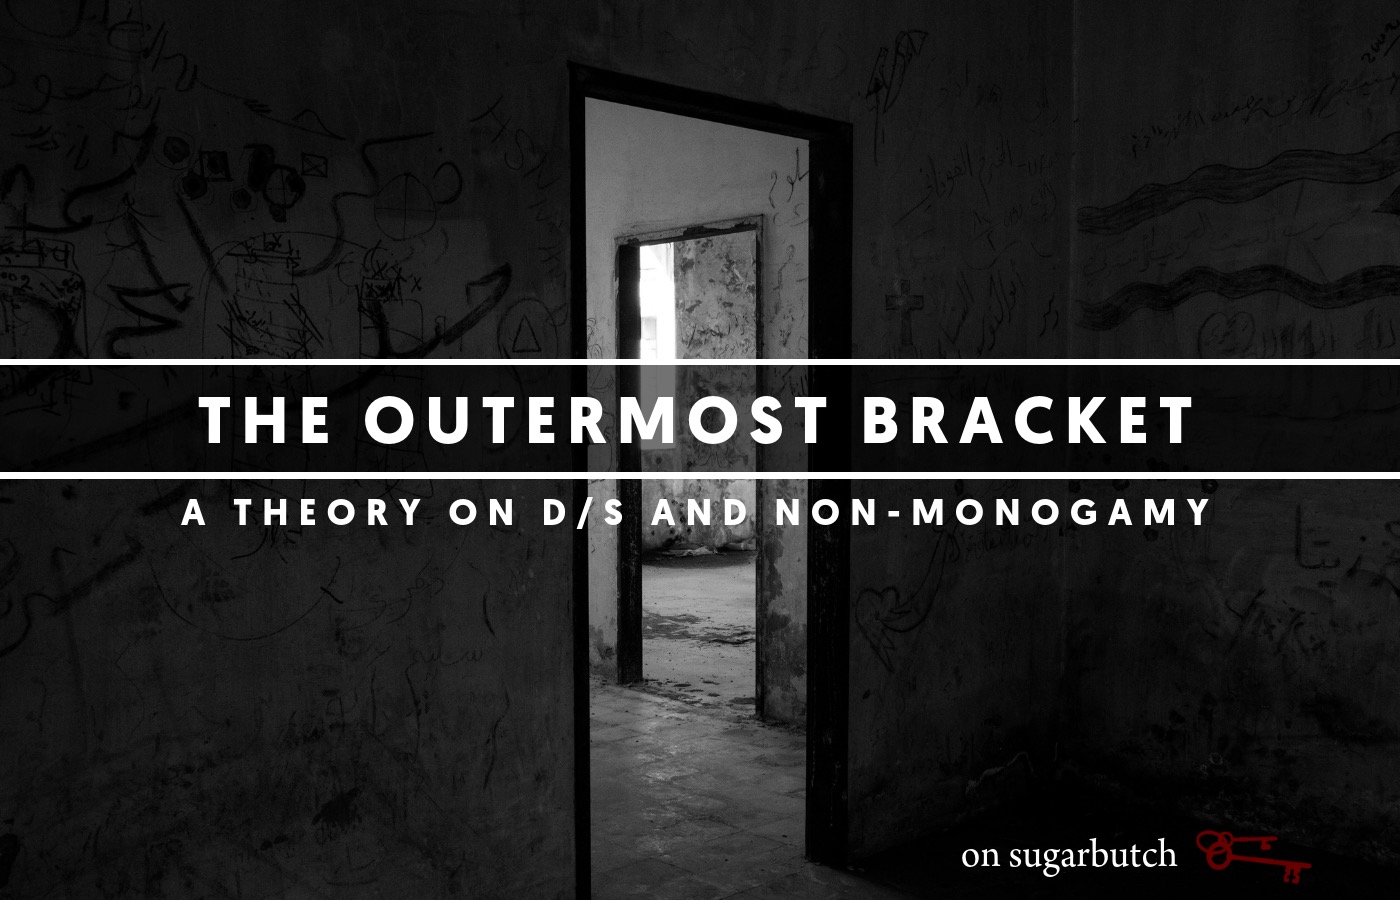 The Outermost Bracket™: A Theory on D/s and Non-Monogamy